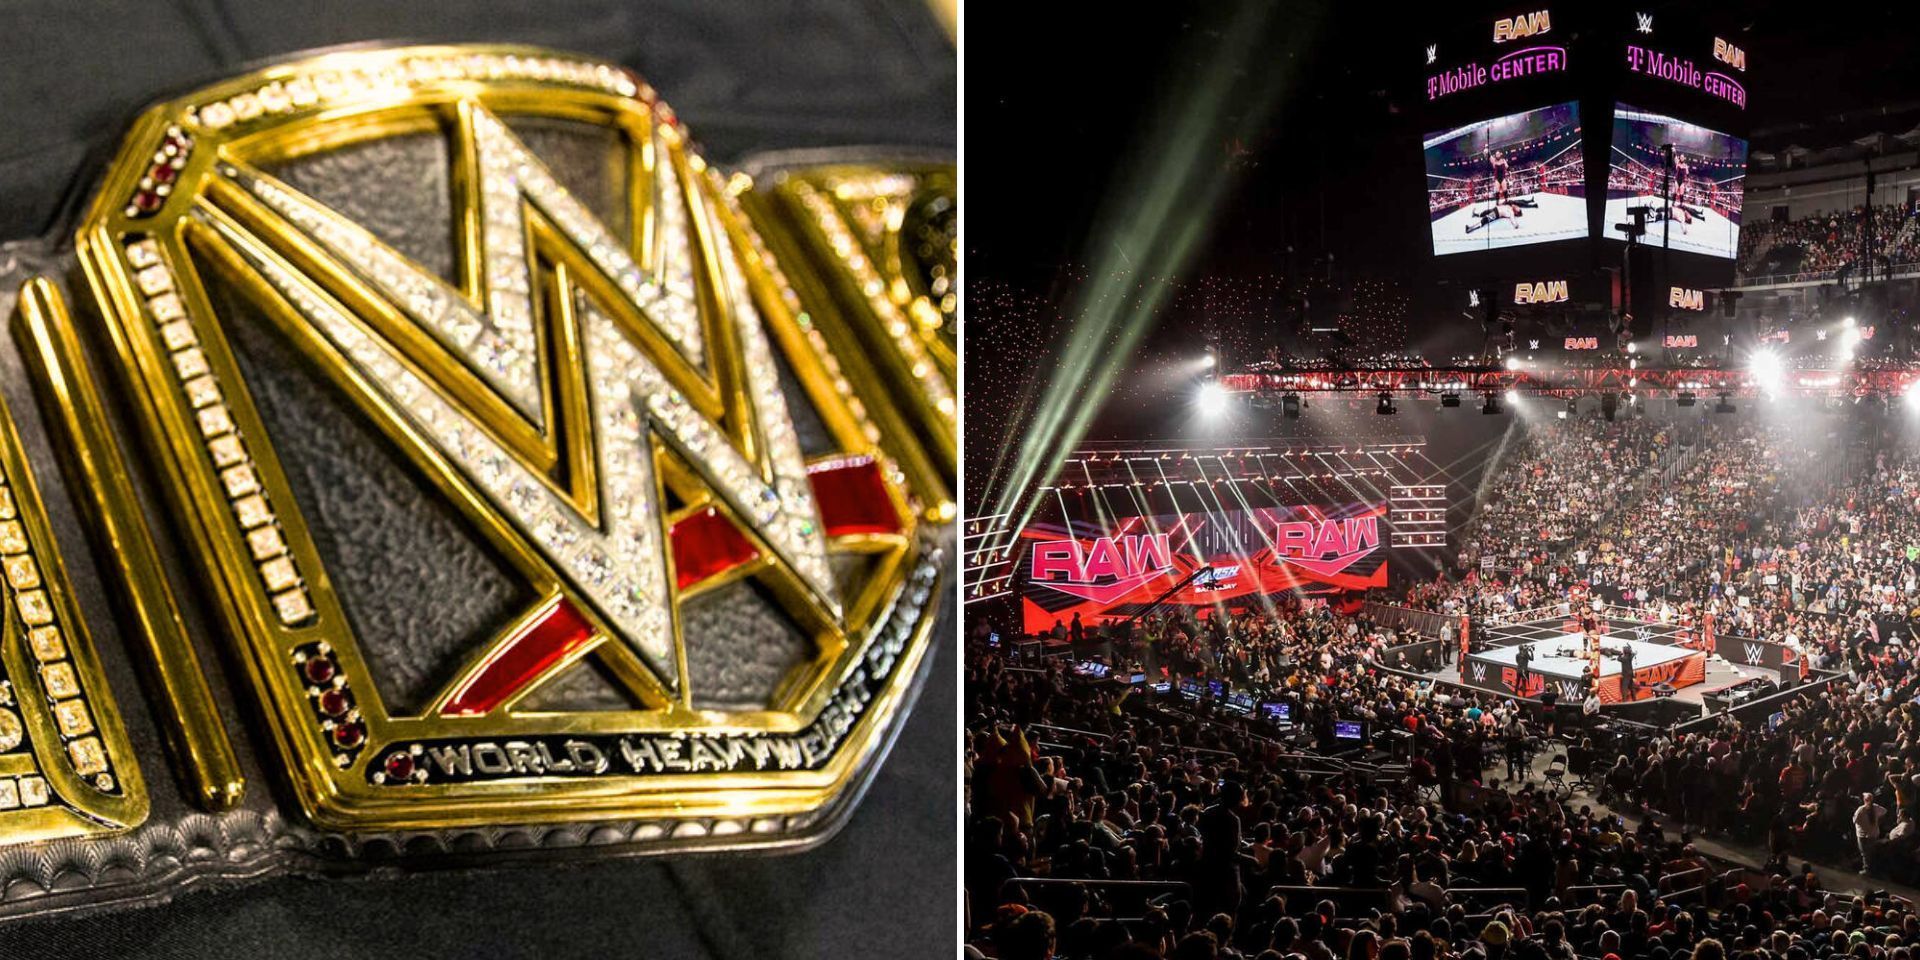 A former WWE Champion was assaulted on RAW (Images via WWE.com)